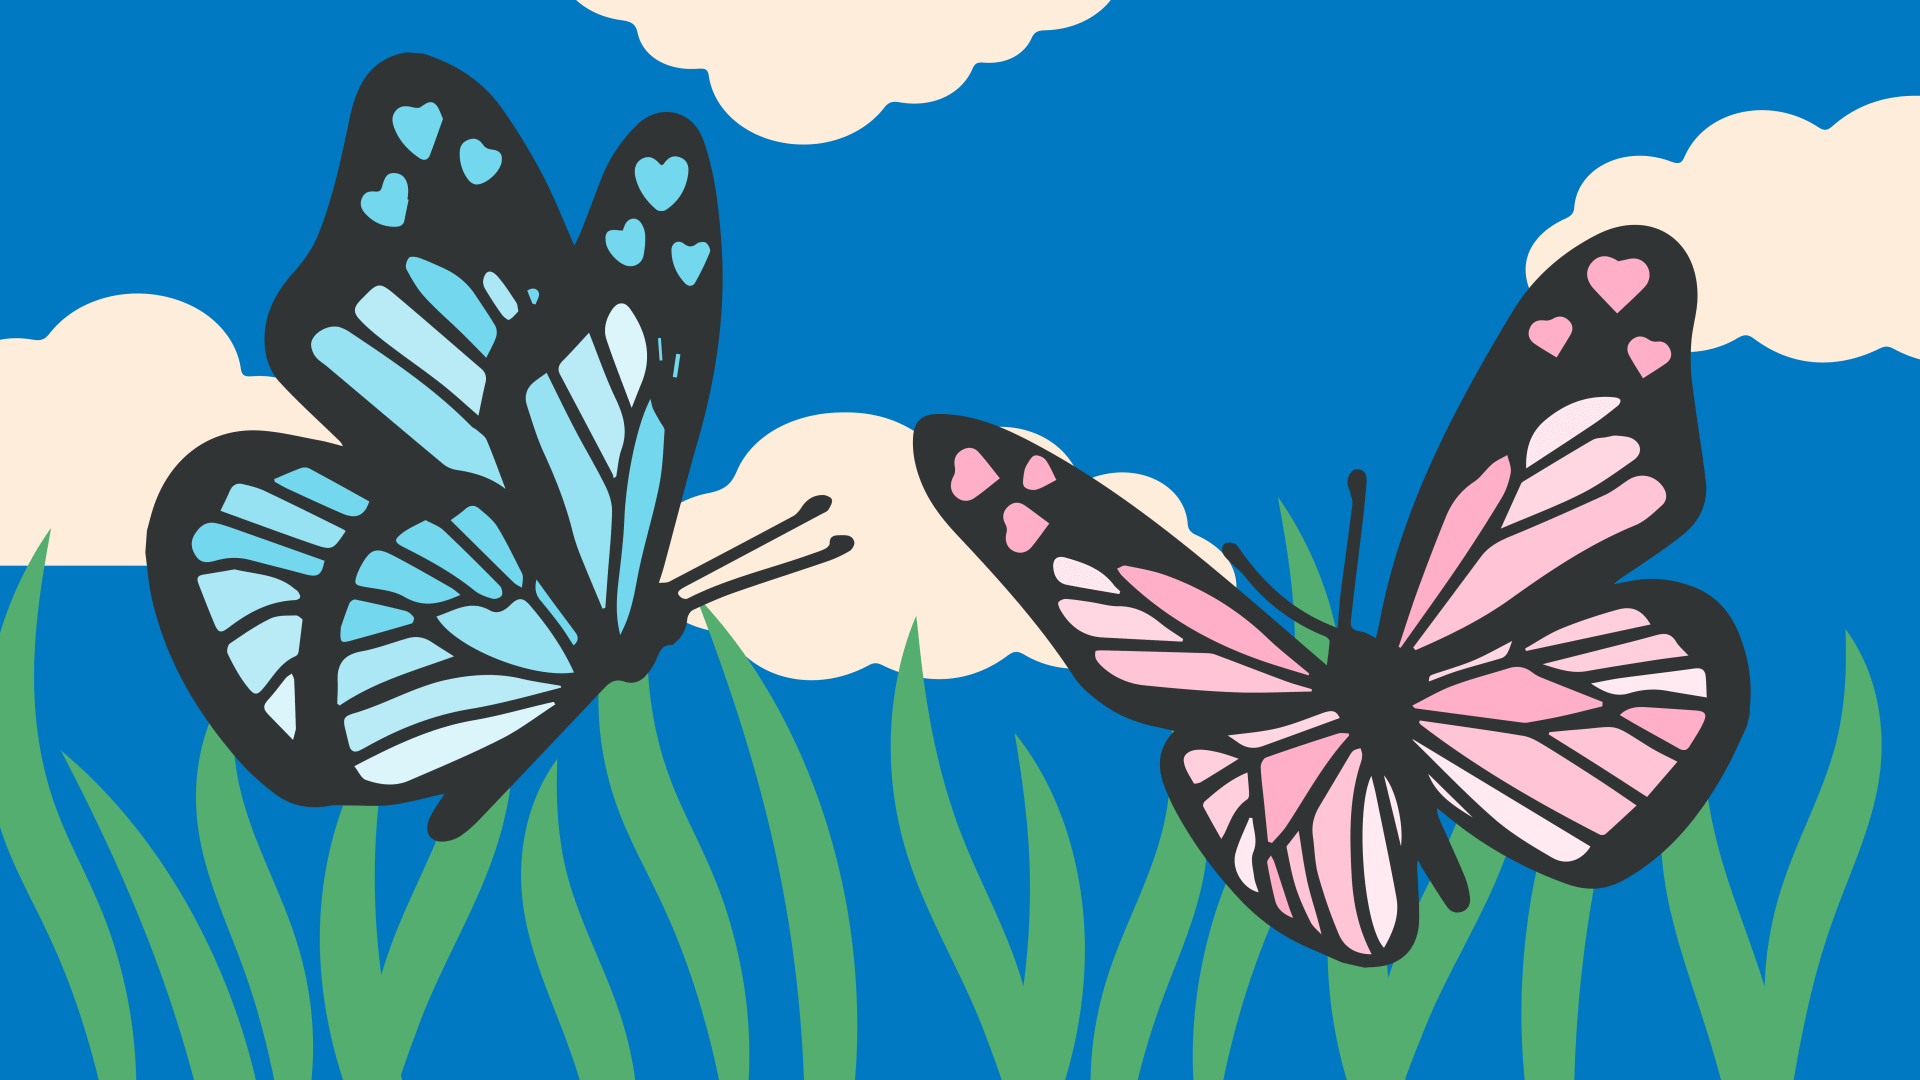 A light blue and a light pink butterfly flying together over a background of grass, a sky, and clouds. A graphic made for Transgender Day of Visibility.